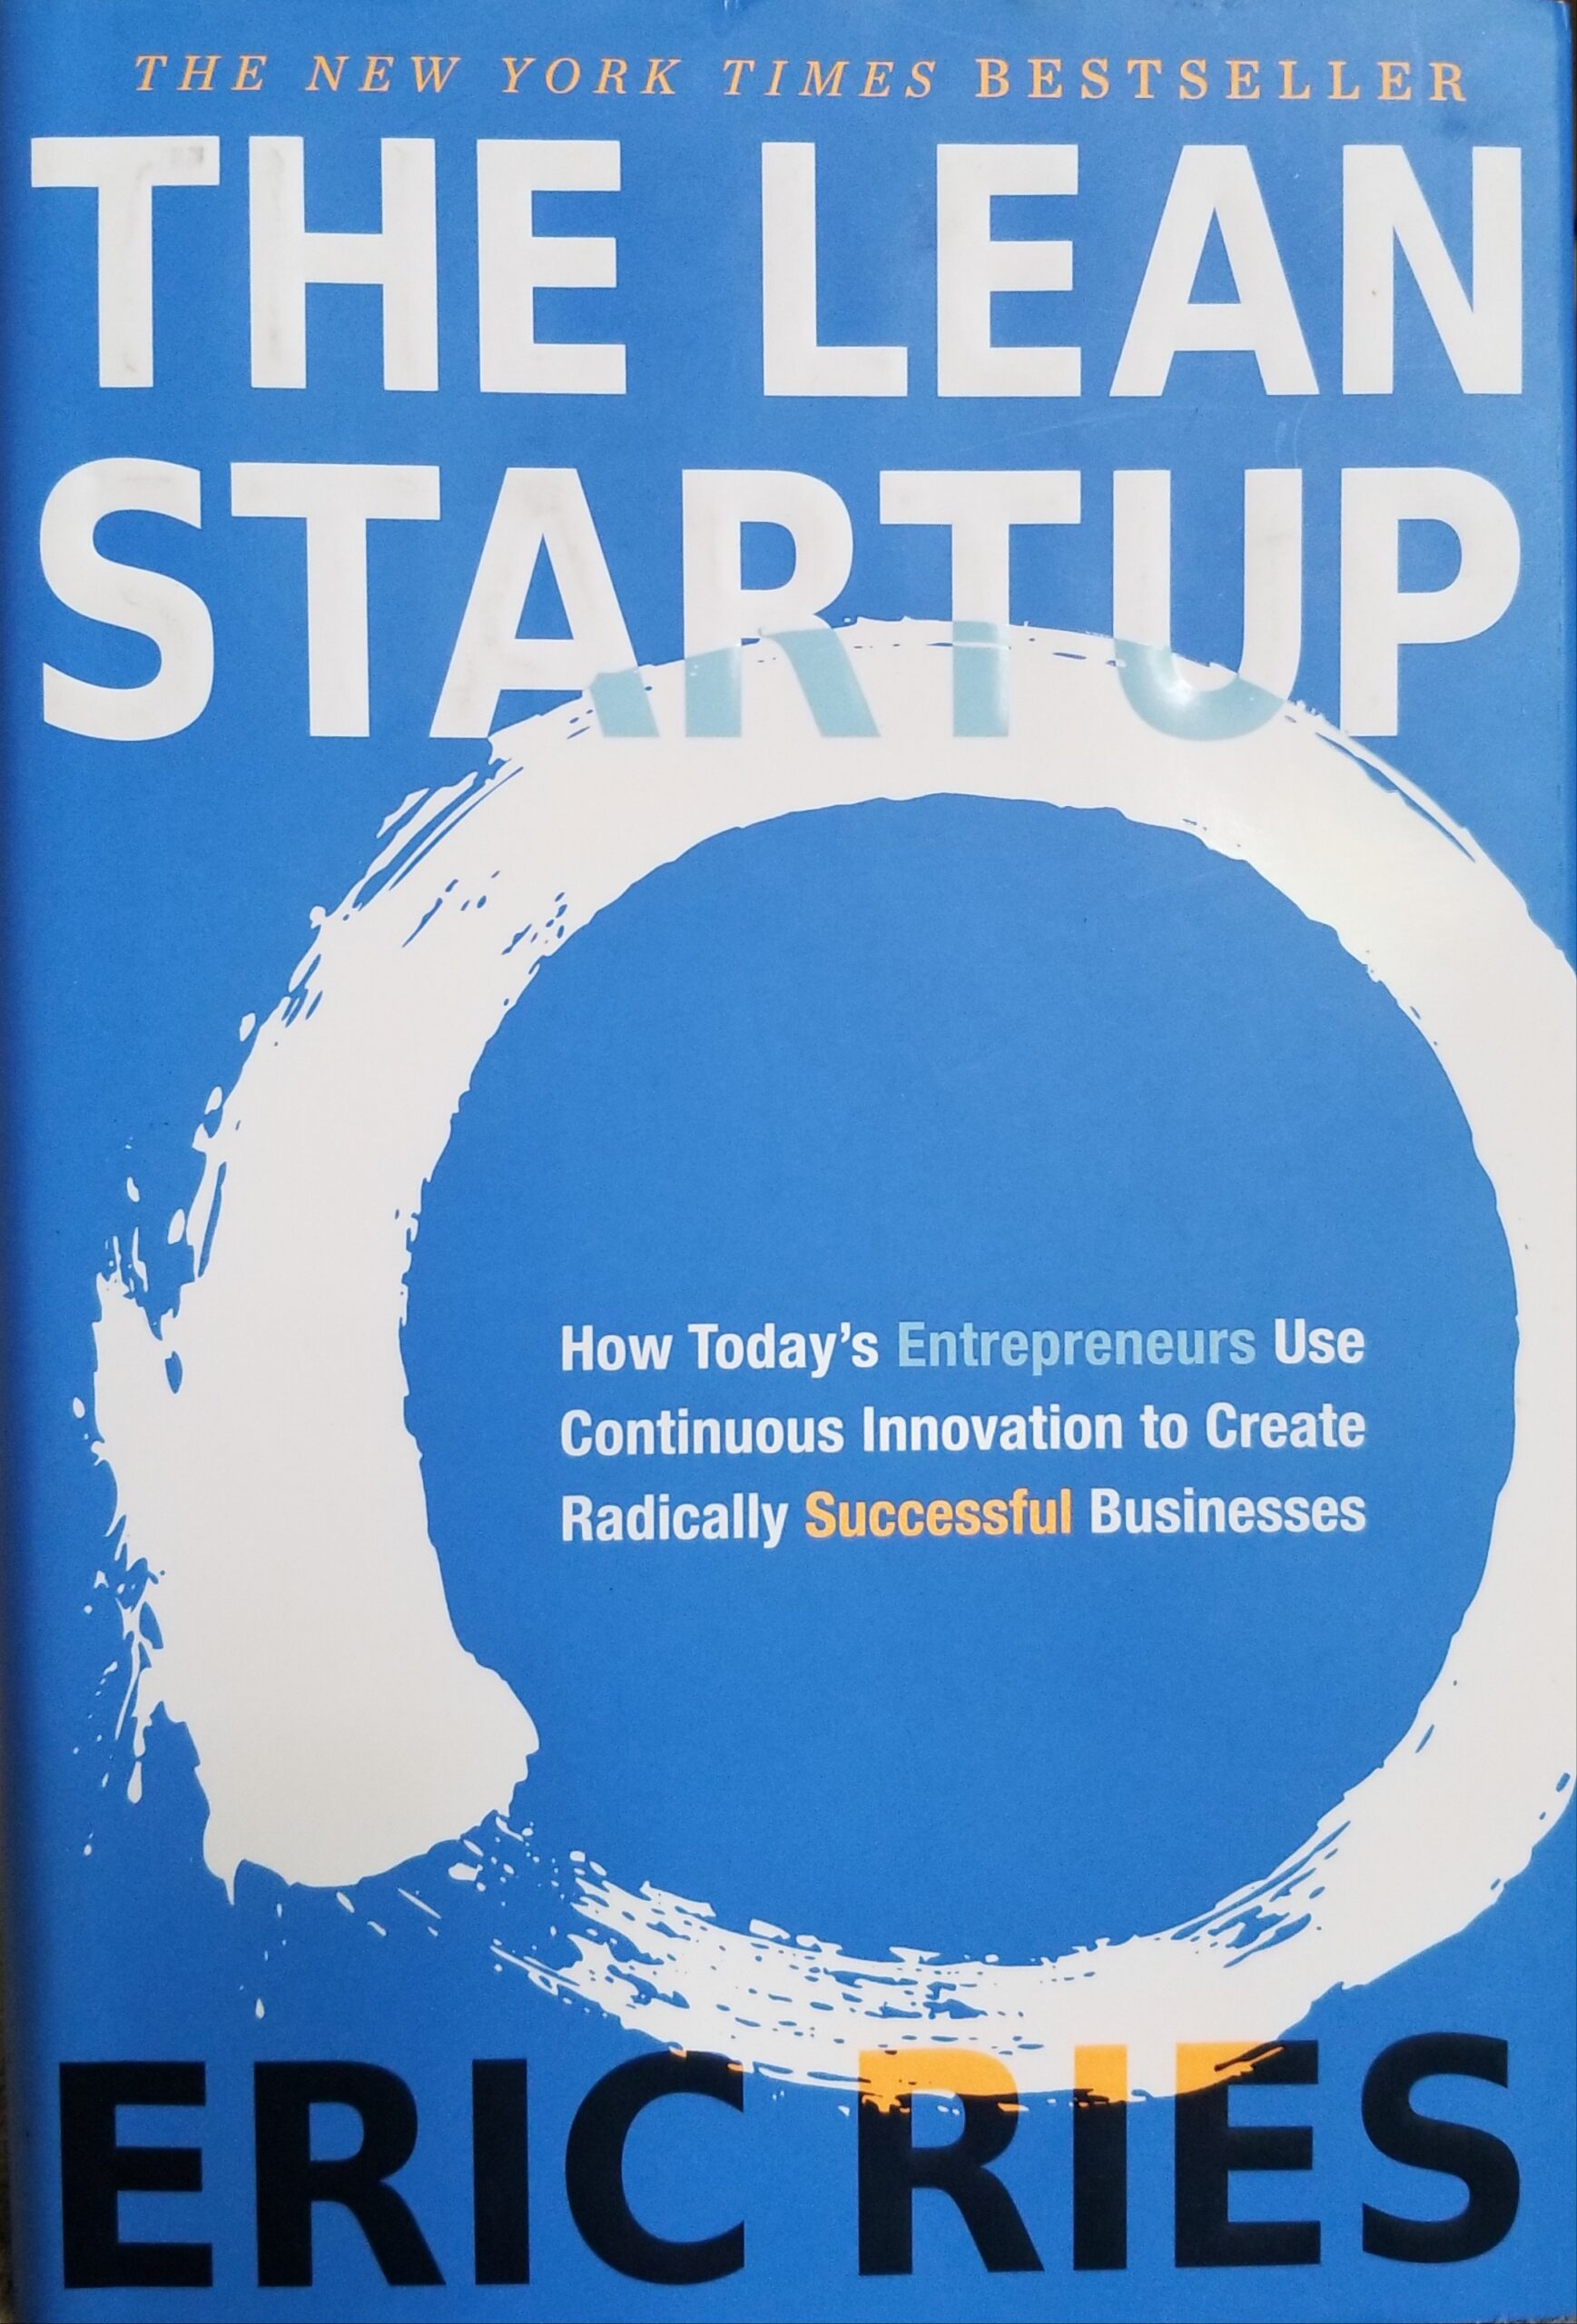 The Lean Startup book cover by Eric Ries. Photo by: Matthew McGuire